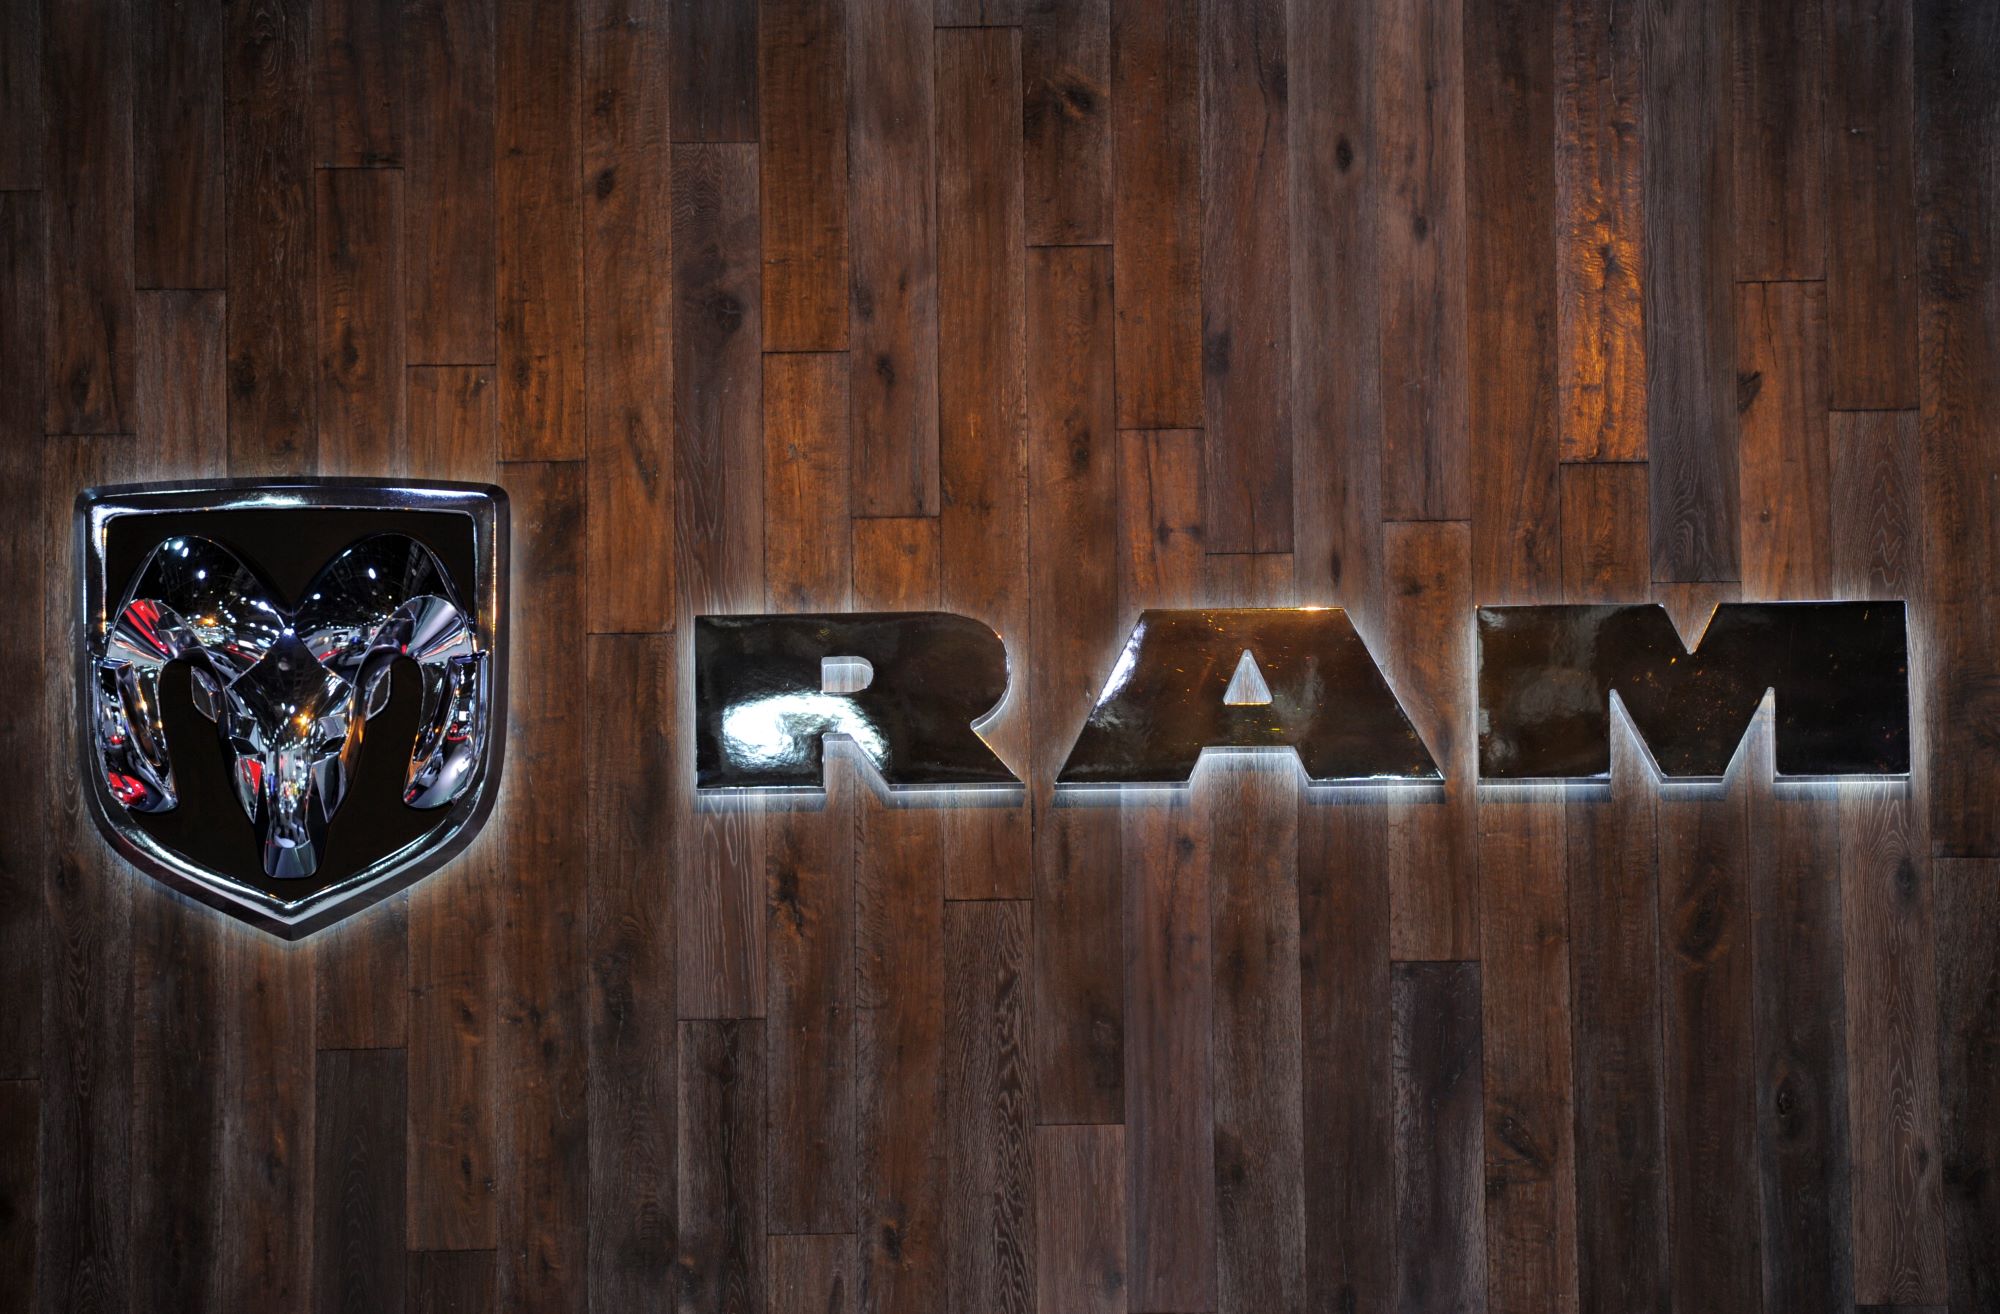 Ram logo against a wooden background.